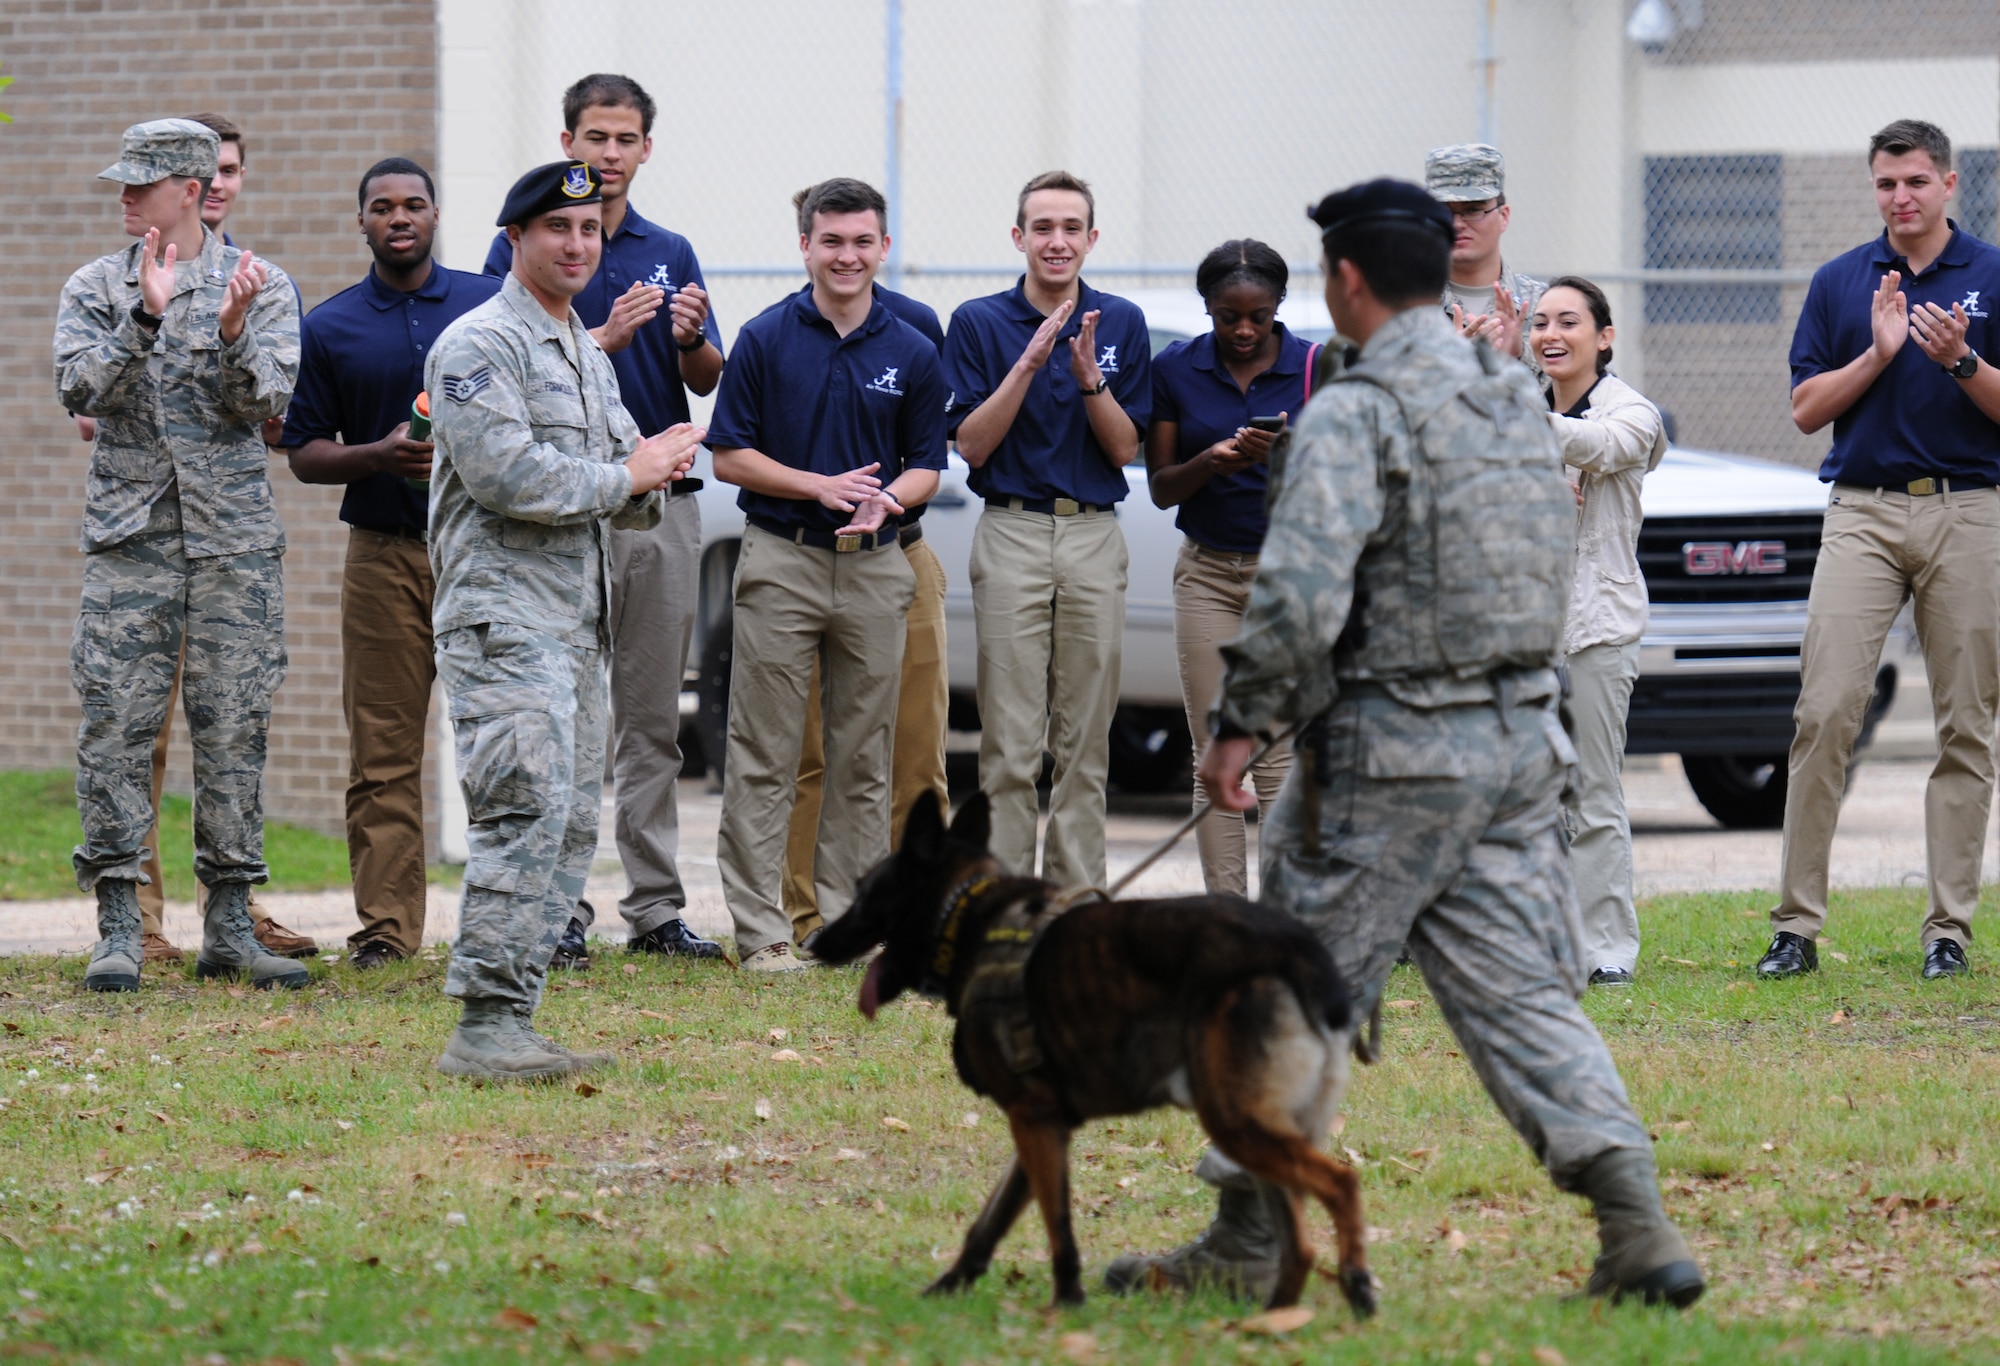 Air Force ROTC cadets applaud after a military working dog demonstration by Senior Airman Matthew Ratchford, 81st Security Forces Squadron military working dog handler and his dog Toki, during Pathways to Blue April 15, 2016, Keesler Air Force Base, Miss. Pathways to Blue, a diversity outreach event hosted by 2nd Air Force, the 81st Training Wing and the 403rd Wing, included more than 180 cadets from Air Force ROTC detachments from various colleges and universities. Cadets received hands-on briefings on technical and flying operations and an orientation flight in support of the Air Force's Diversity Strategic Roadmap program.  (U.S. Air Force photo by Kemberly Groue)

